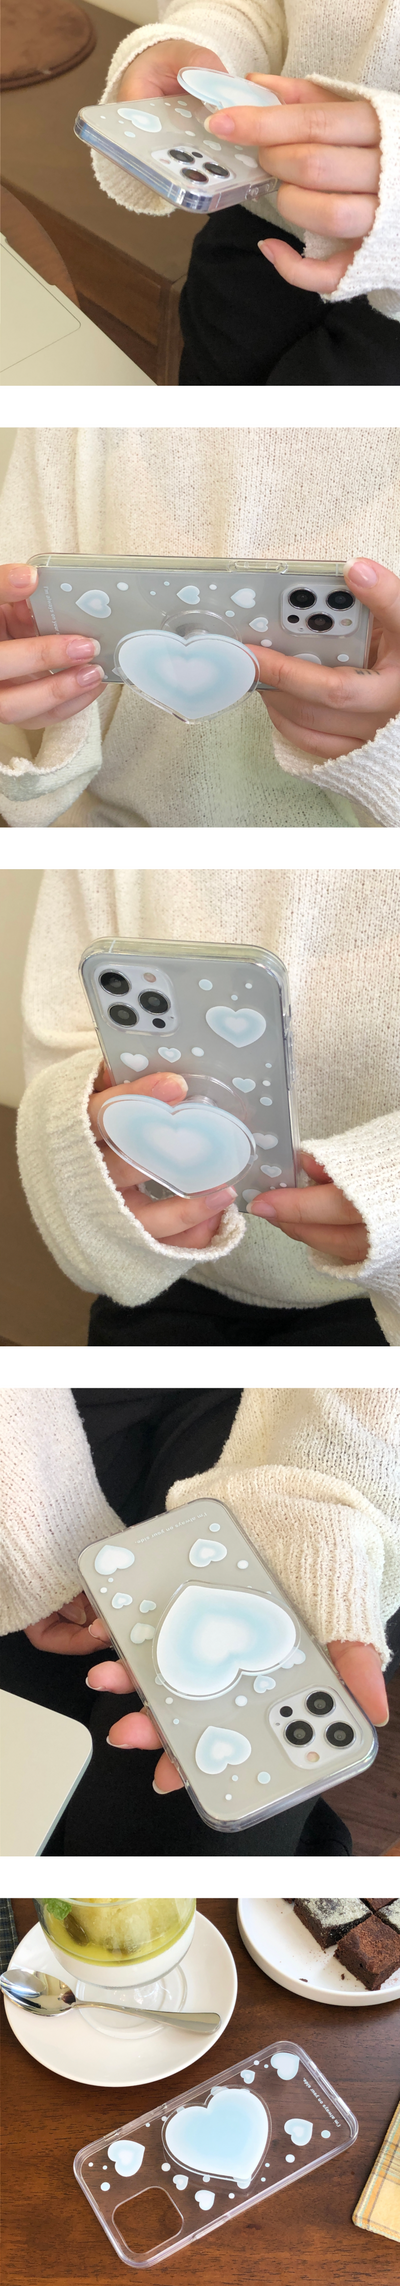 Plumpily Heart Glossy Case